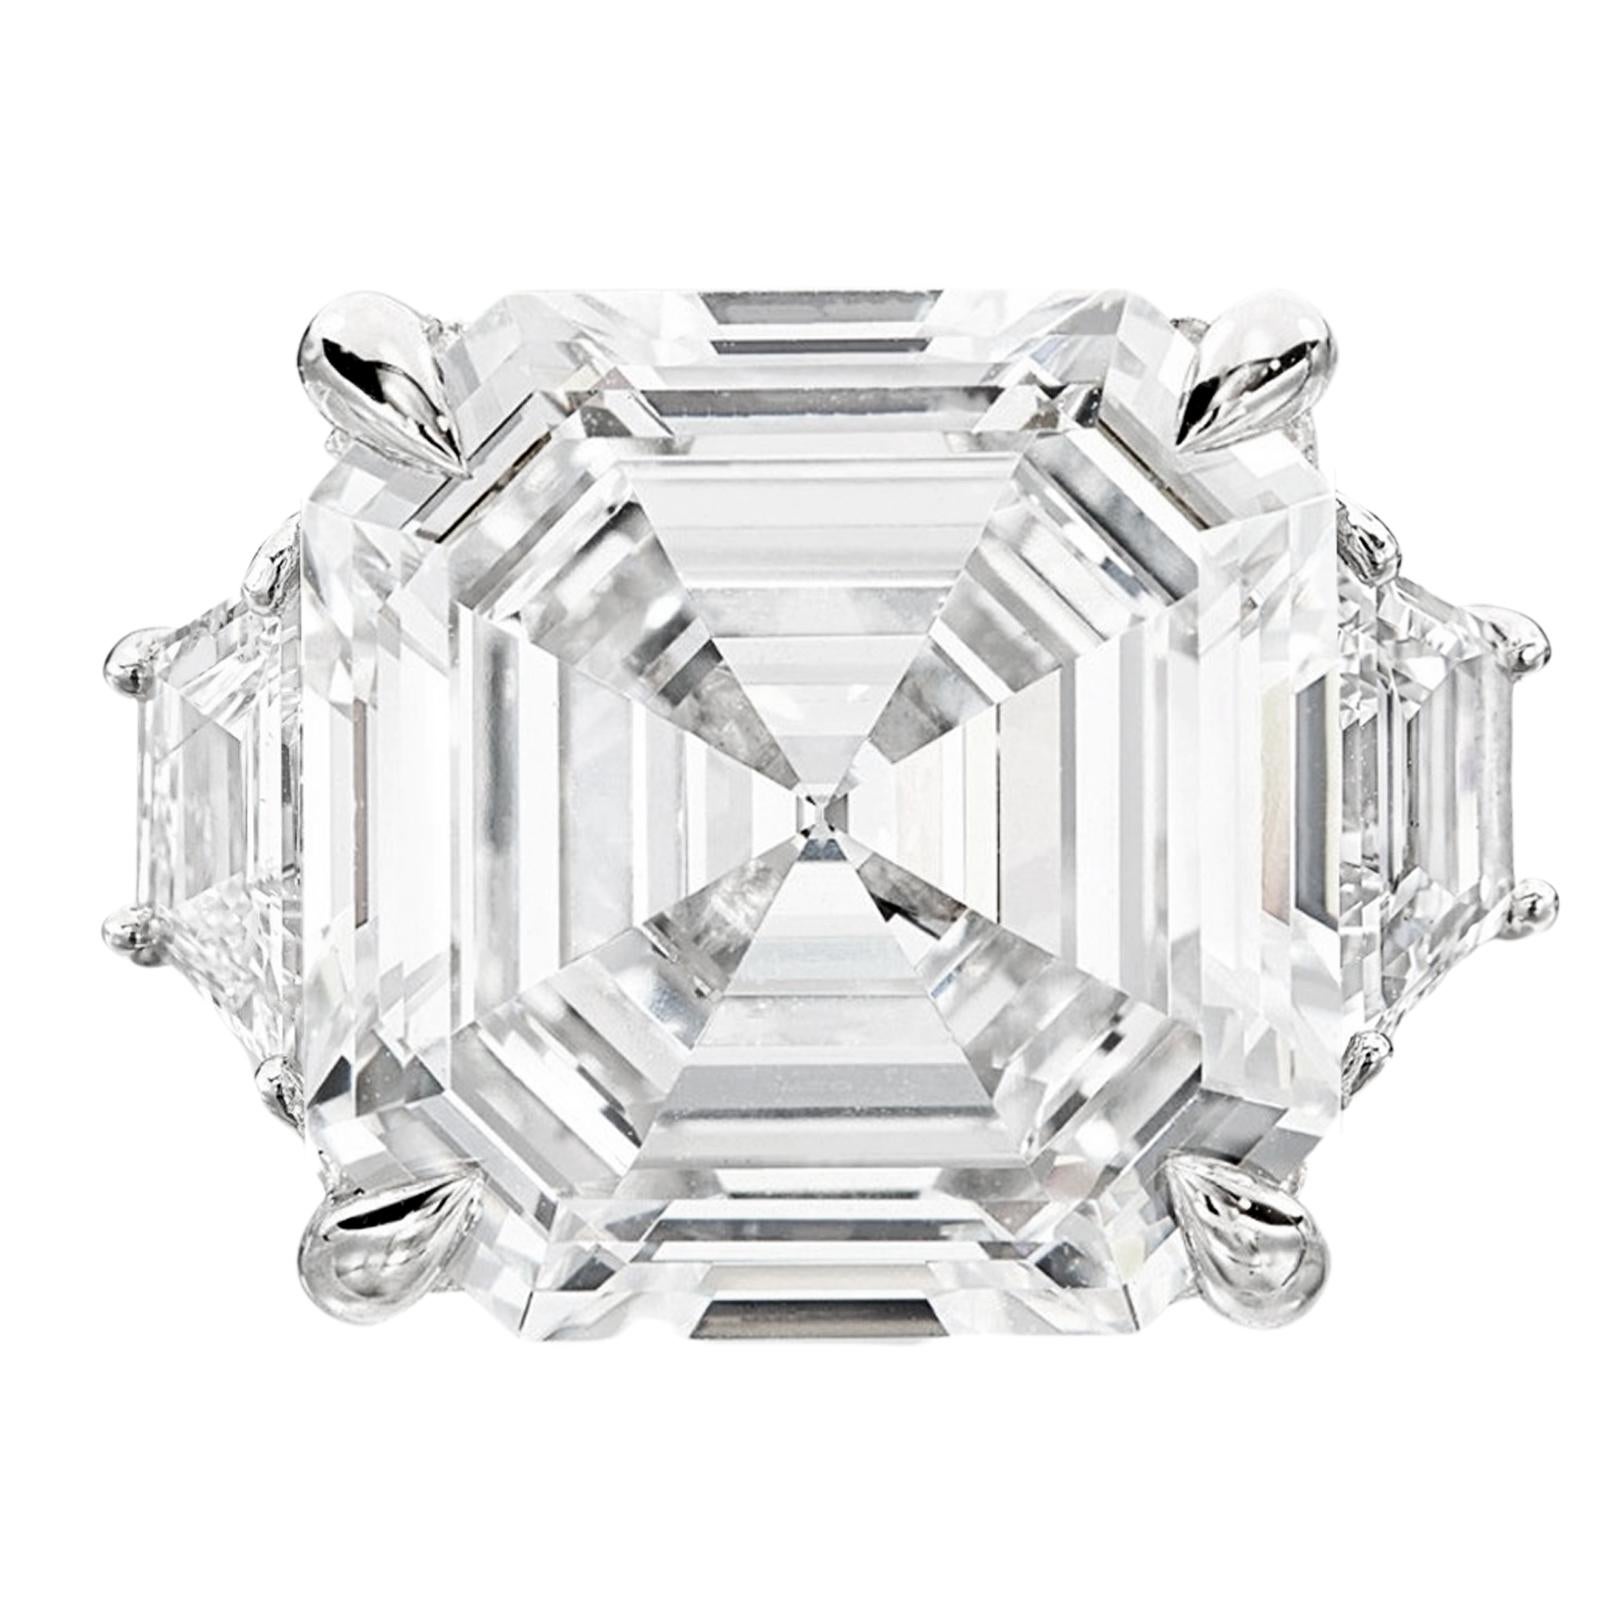 GIA certified Asscher cut diamond, the epitome of refinement and investment value. Meticulously crafted and set in solid platinum, this exceptional diamond is accompanied by two captivating trapezoid diamonds, creating a masterpiece of timeless